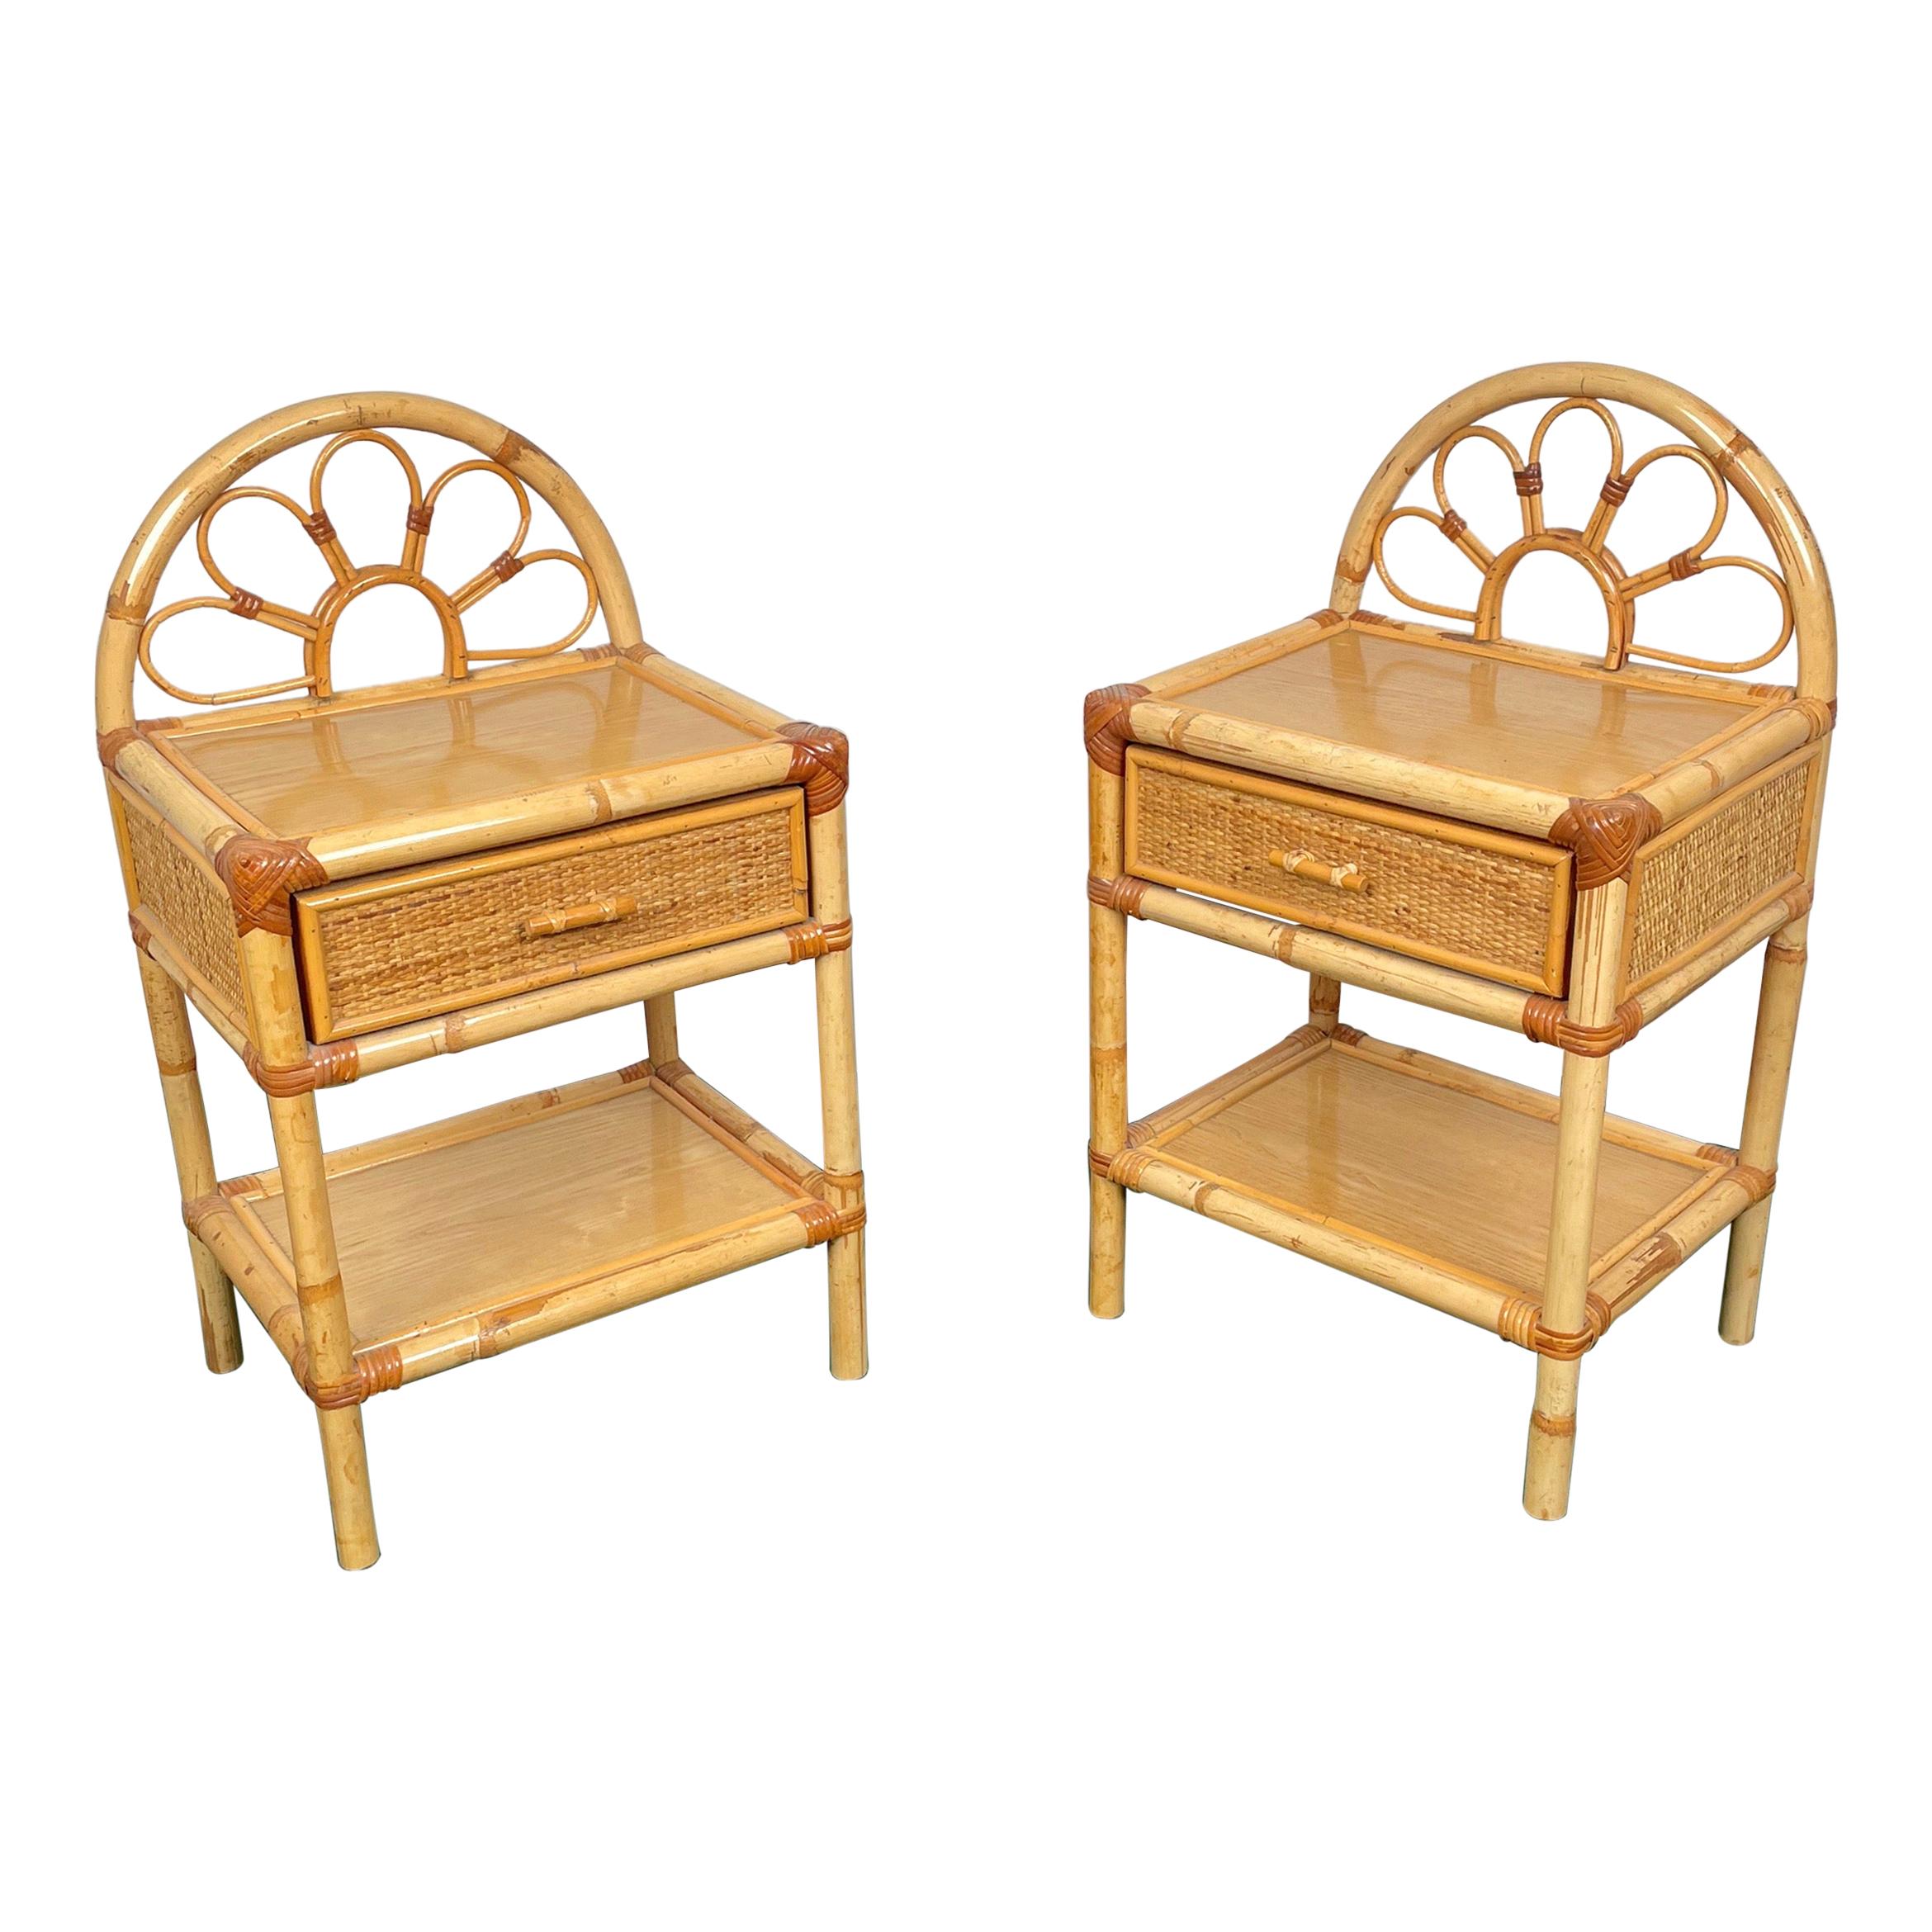 Pair of Bamboo & Rattan Nightstand Drawer Bed Side Tables, Italy, 1970s